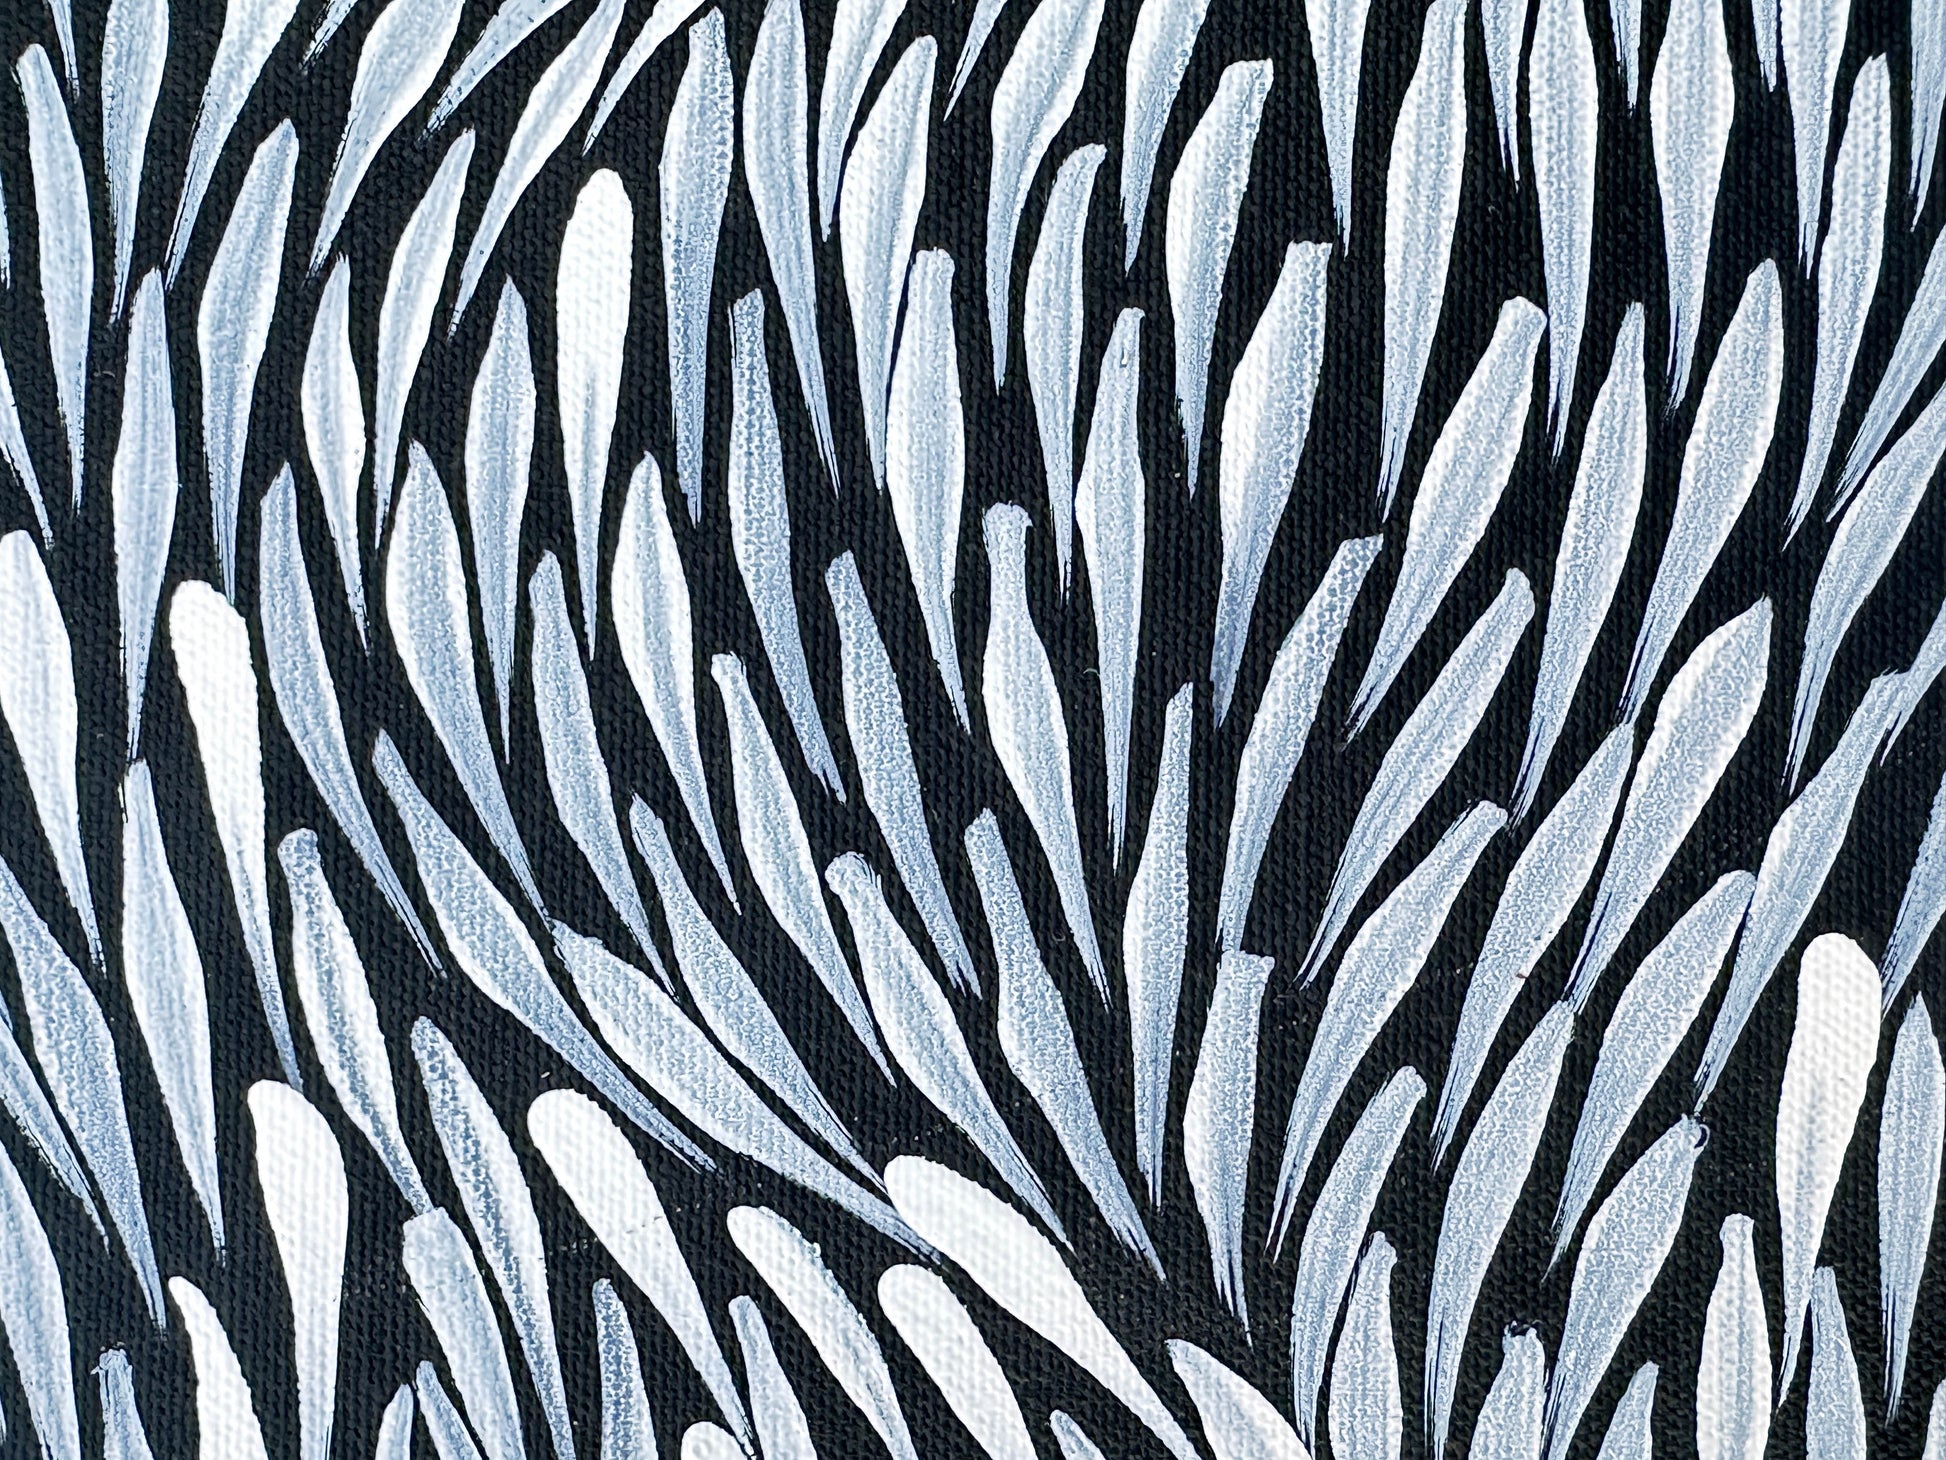 Jeannie Pitjara Petyarre + black and white + monochromatic + bush medicine leaves + utopia + art work + art for sale + painting for sale + indigenous art + aboriginal art + australian art + famous artist + home decor + interior designer + interior decor + decor + wall art + online gallery + art gallery + art of the day + darwin based gallery + family owned business + altyerre + altyerre aboriginal art + bush medicine